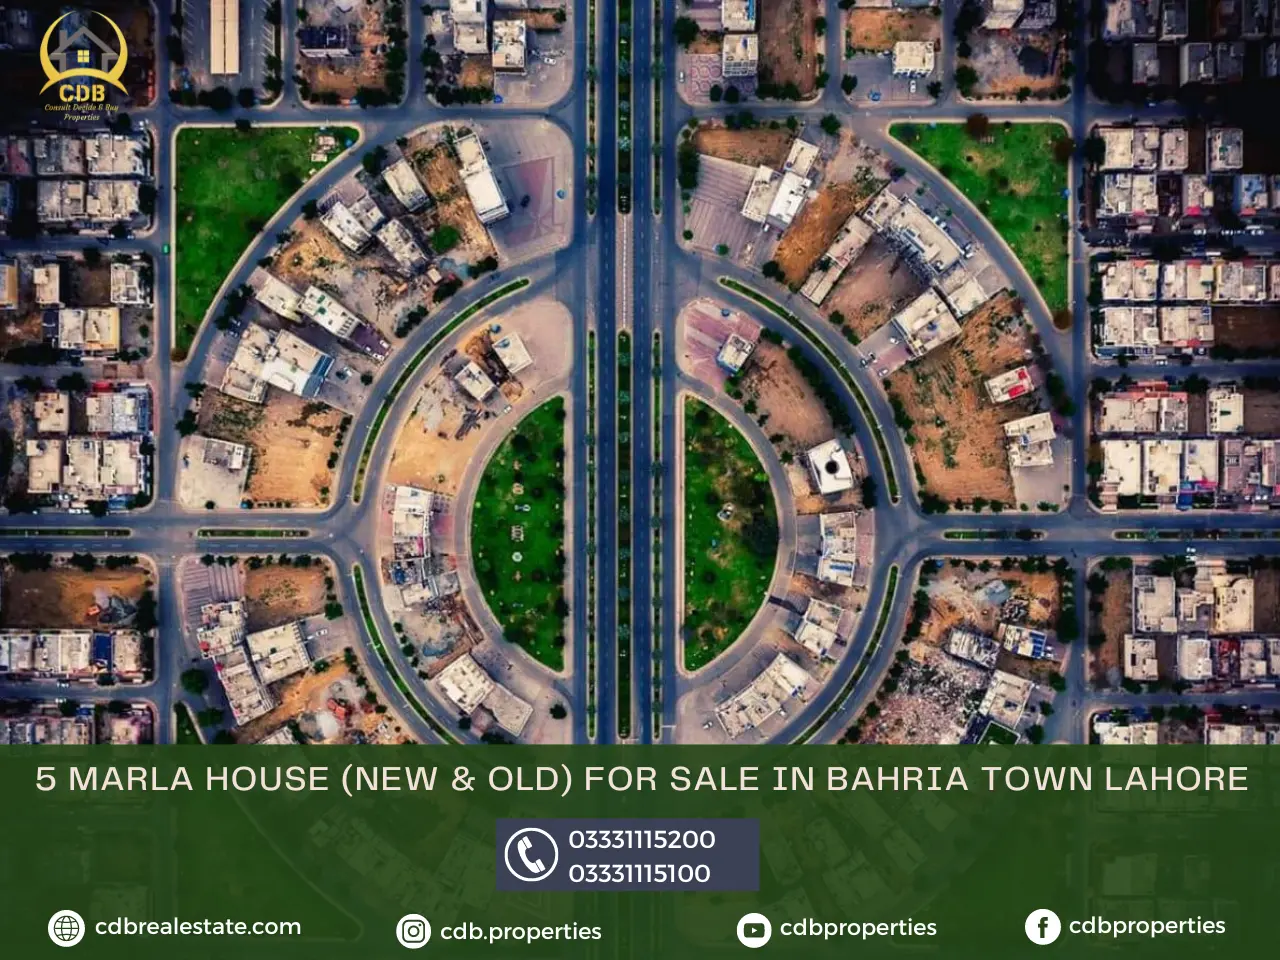 5 Marla House (New & Old) for Sale in Bahria Town Lahore